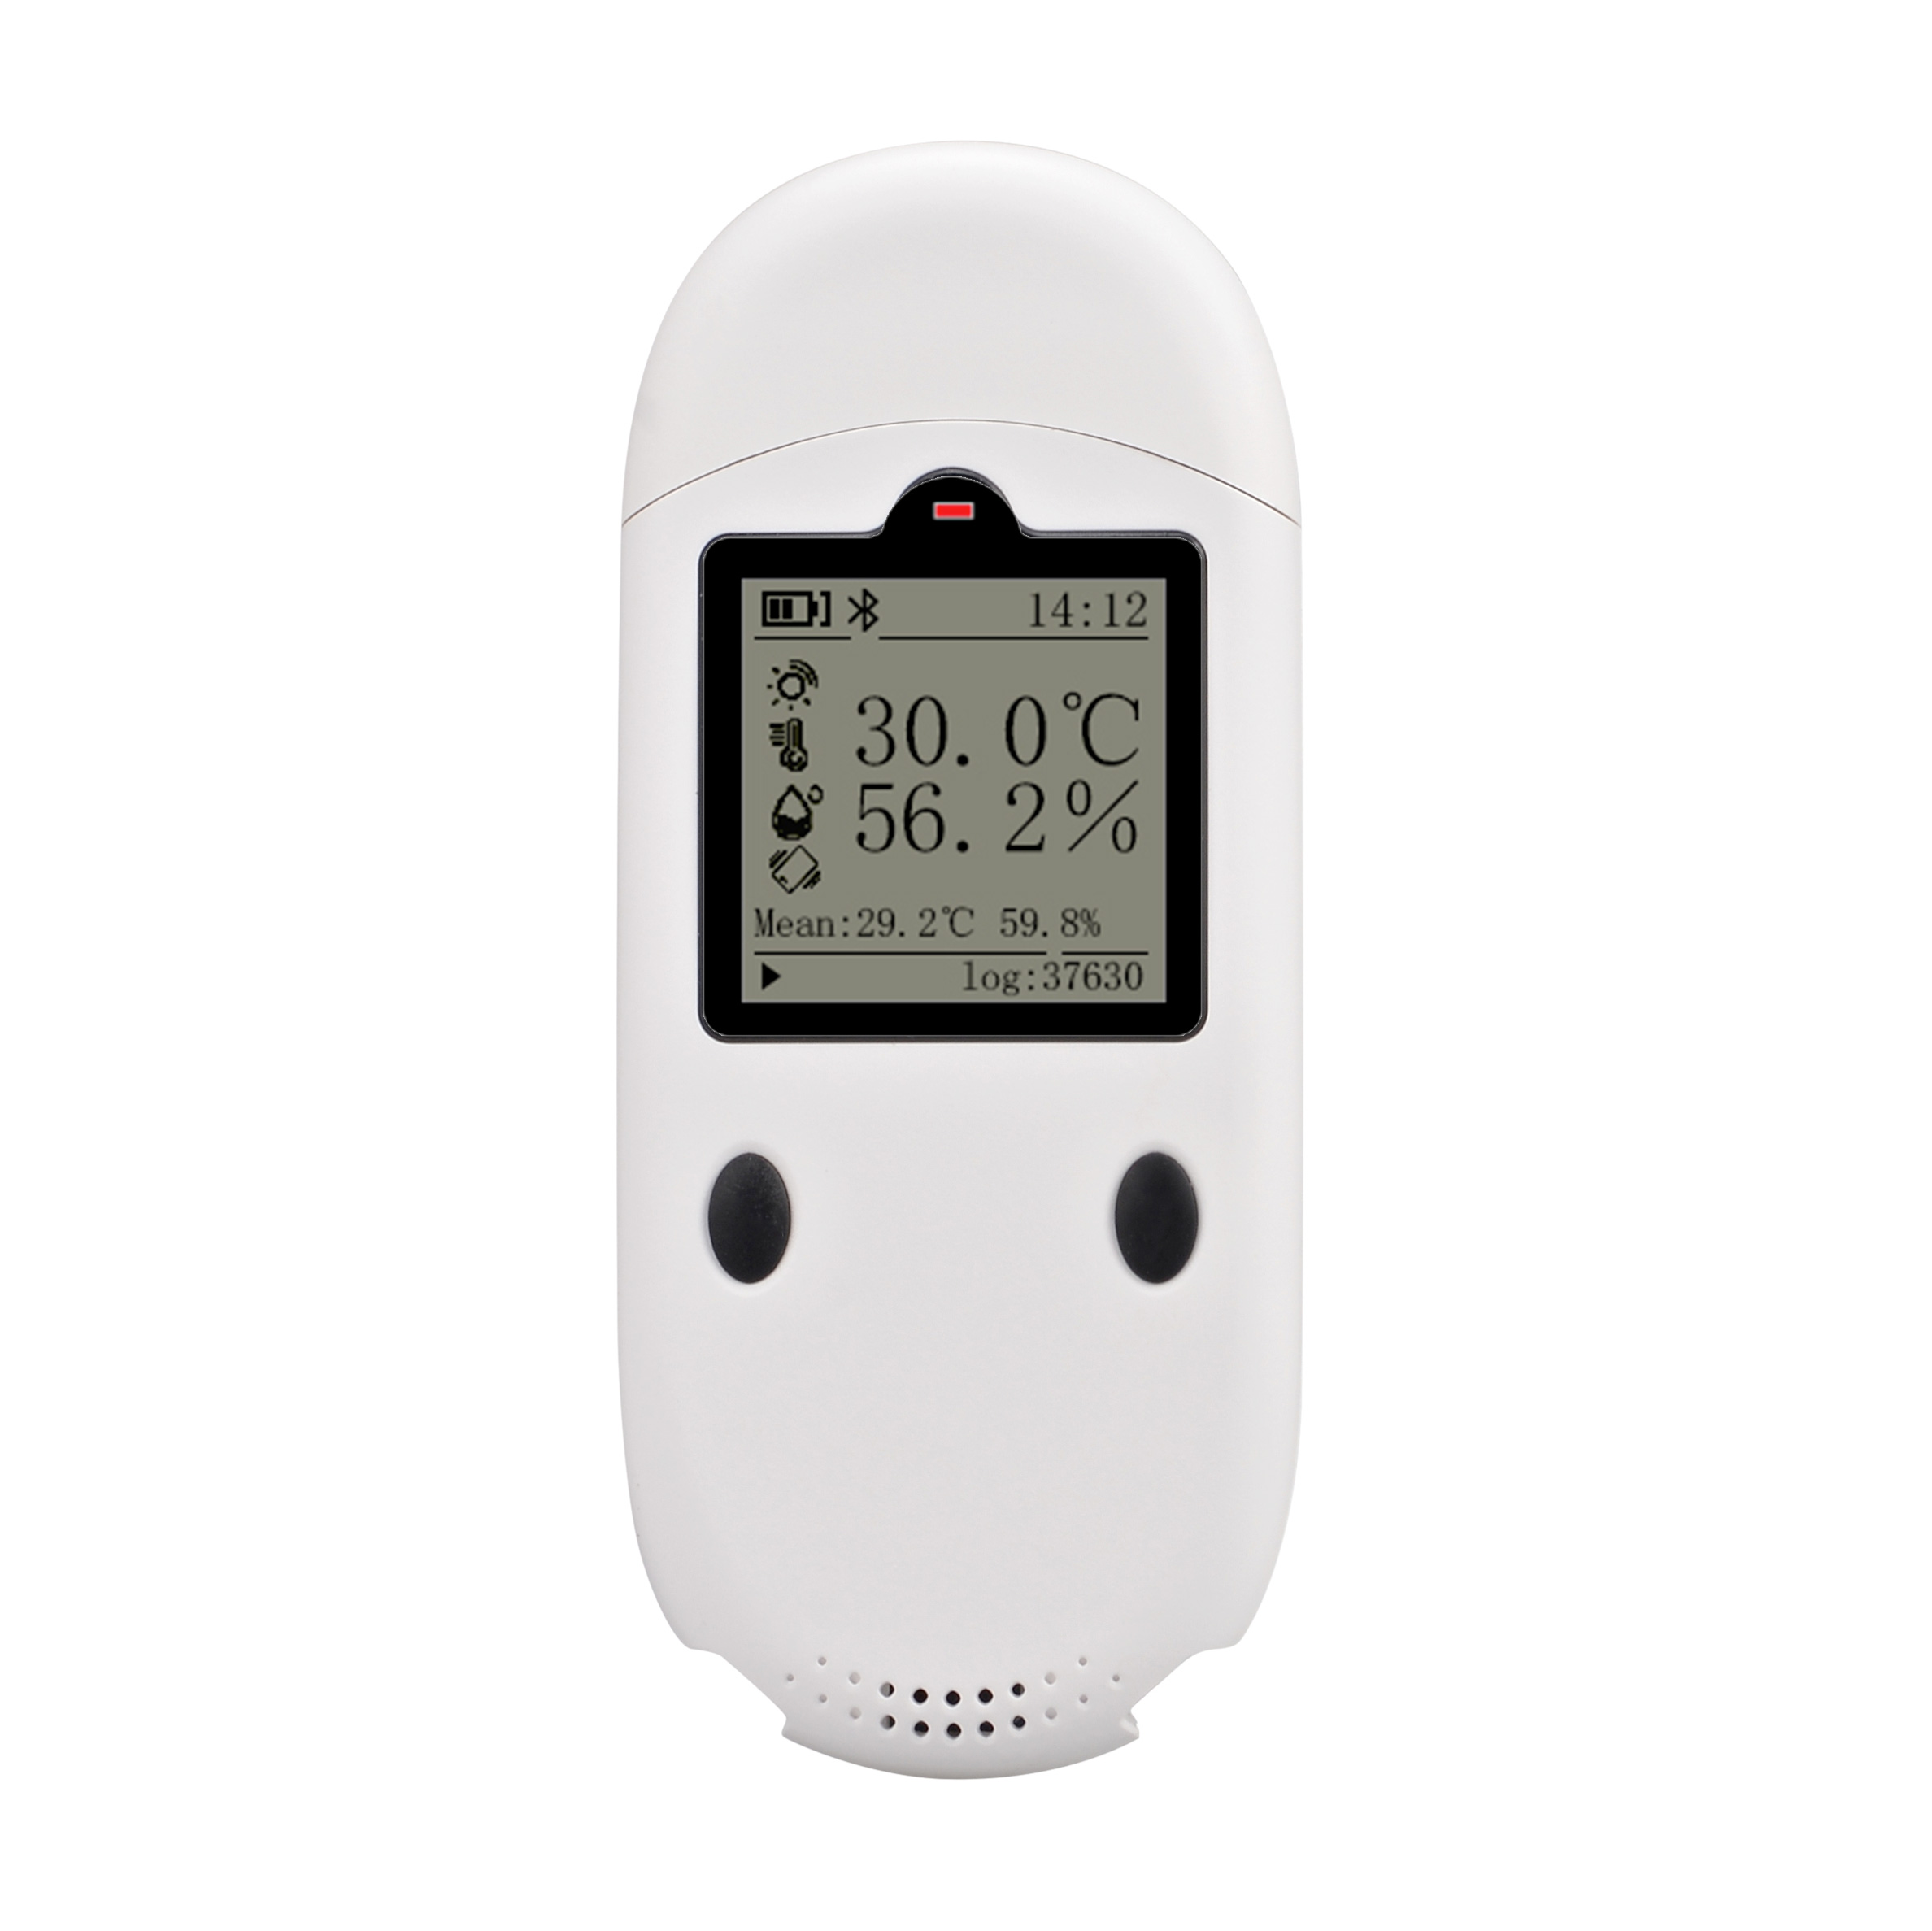 Blue Tooth Beacon DB01 Temperature & Humidity monitoring with LCD USB connect PC or Host Tracker